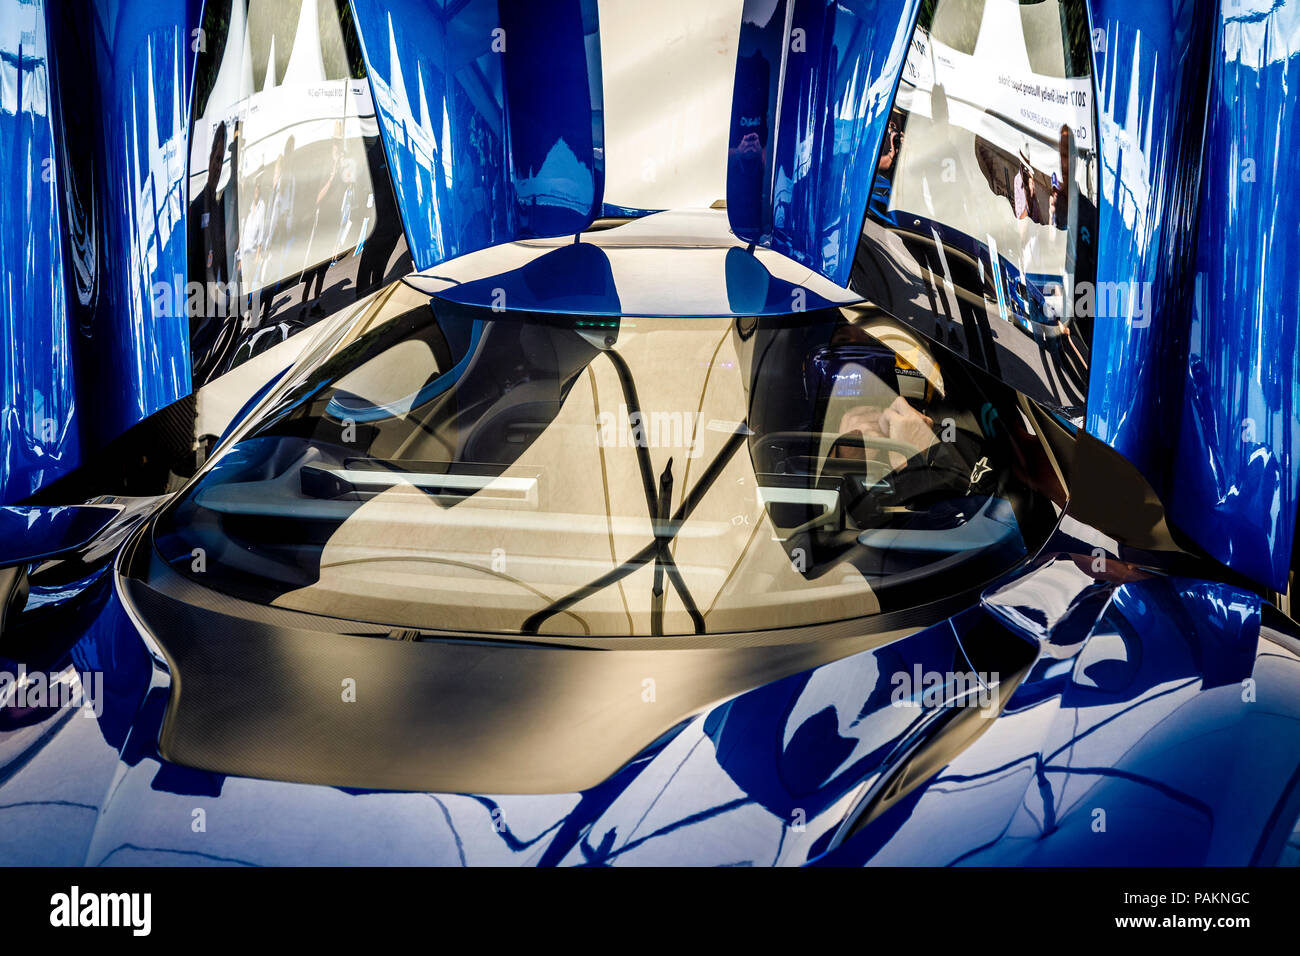 2018 NIO EP9 Electric Supercar detail abstract at the 2018 Goodwood Festival of Speed, Sussex, UK. Stock Photo